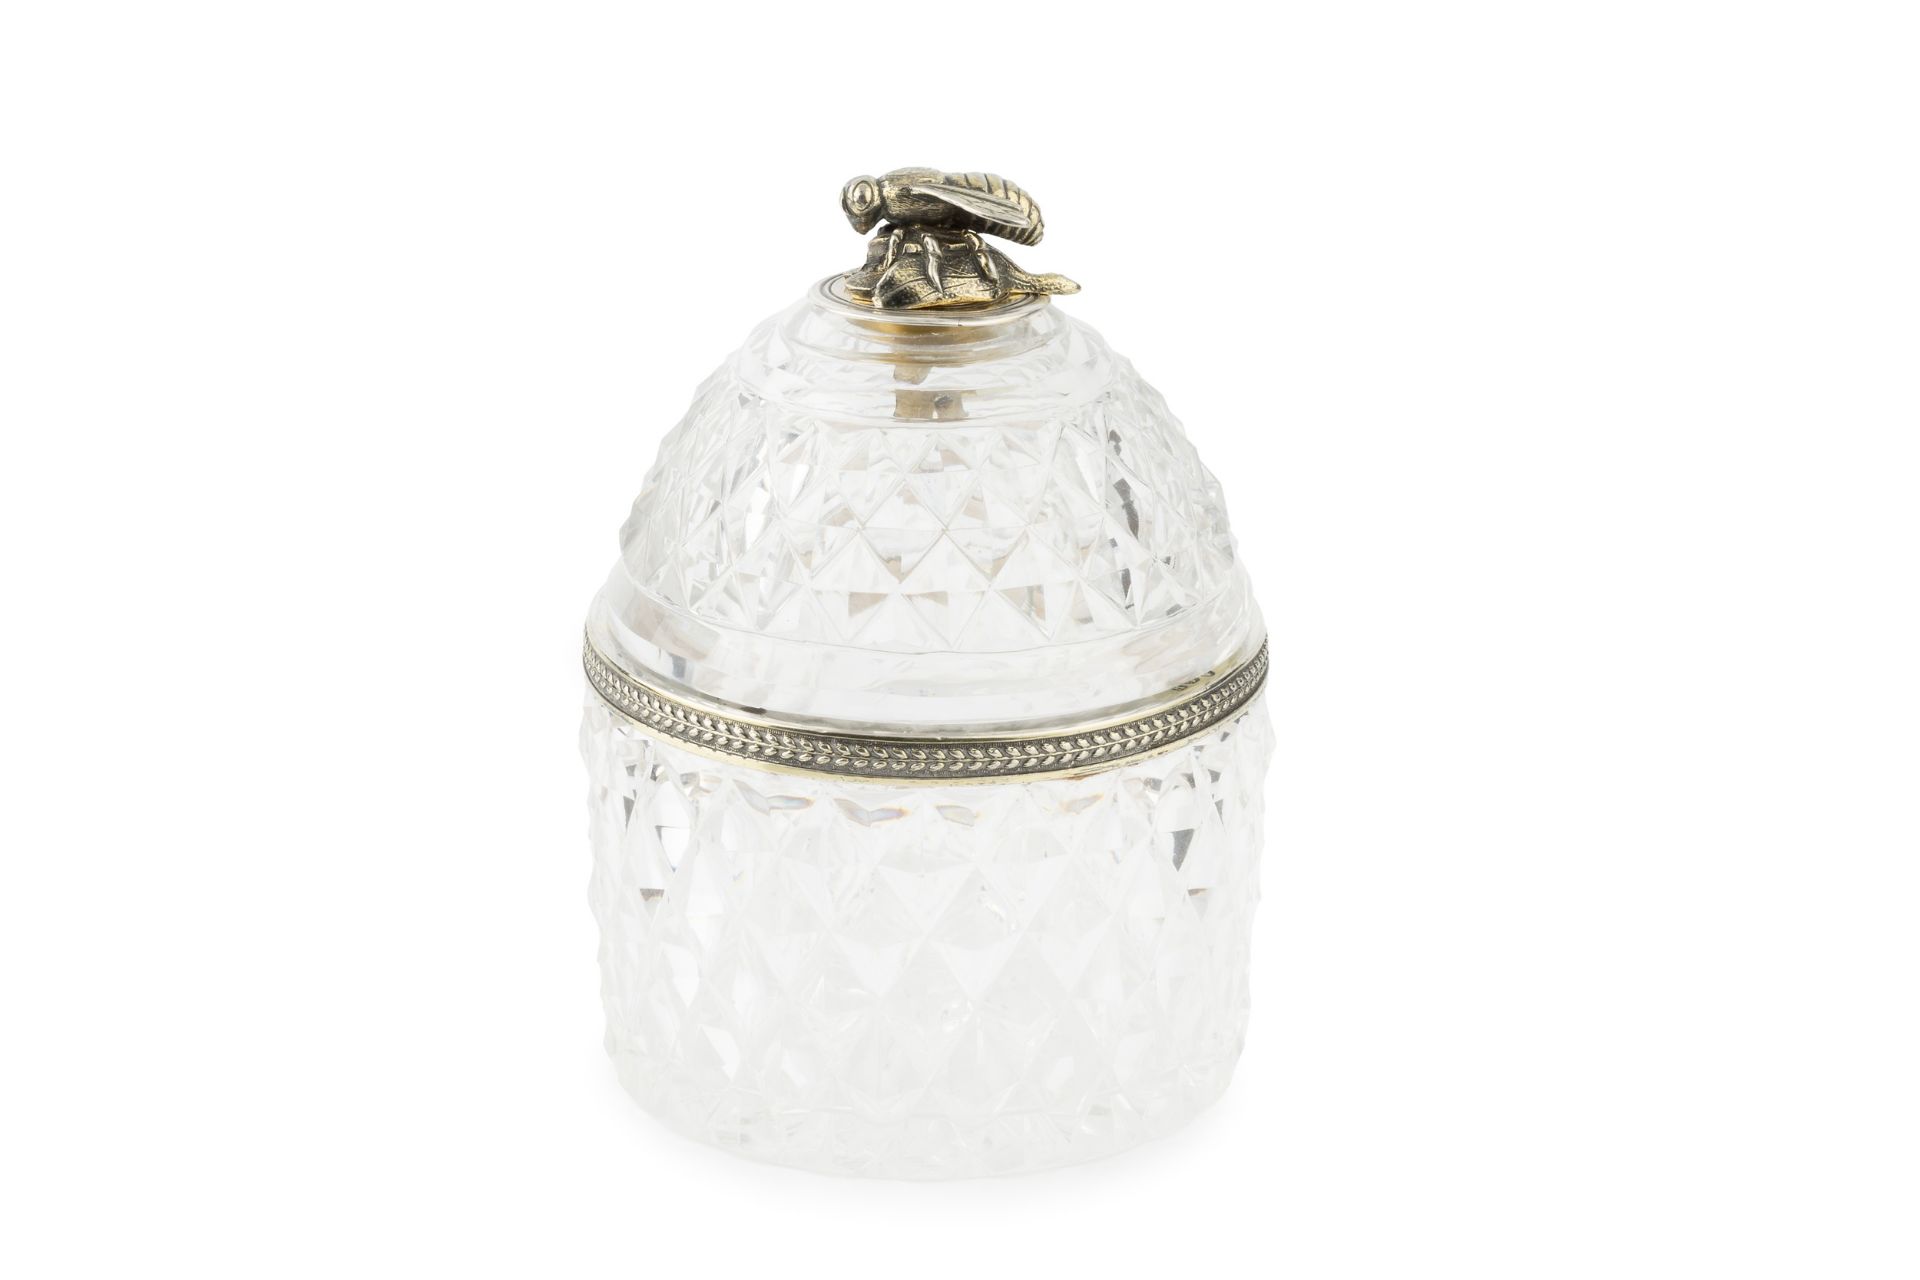 A George III silver-gilt mounted cut glass honey pot and cover, the hobnail cut cylindrical jar with